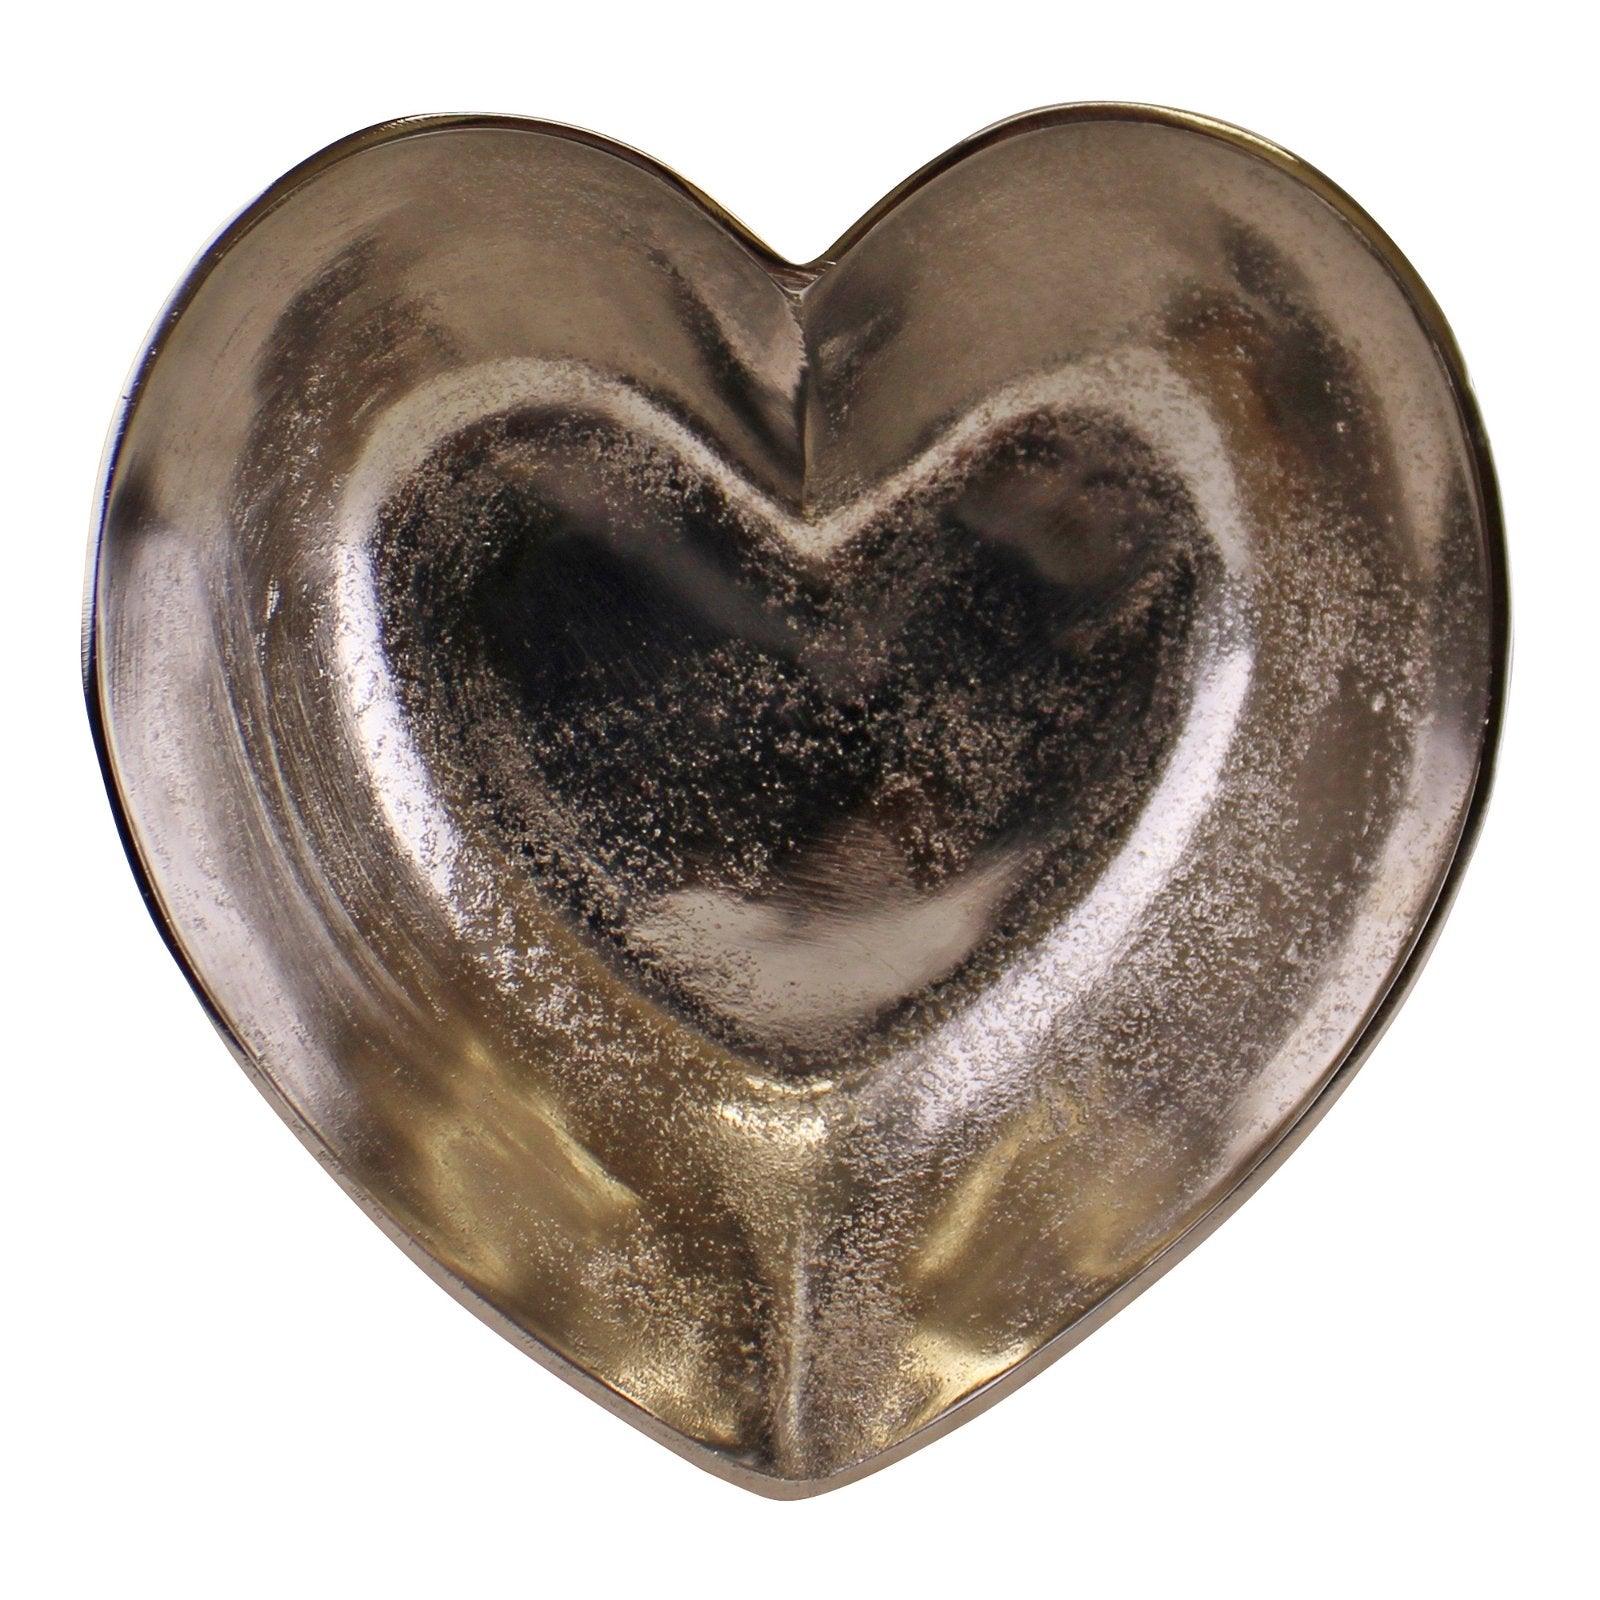 View Silver Metal Heart Shaped Decorative Bowl information